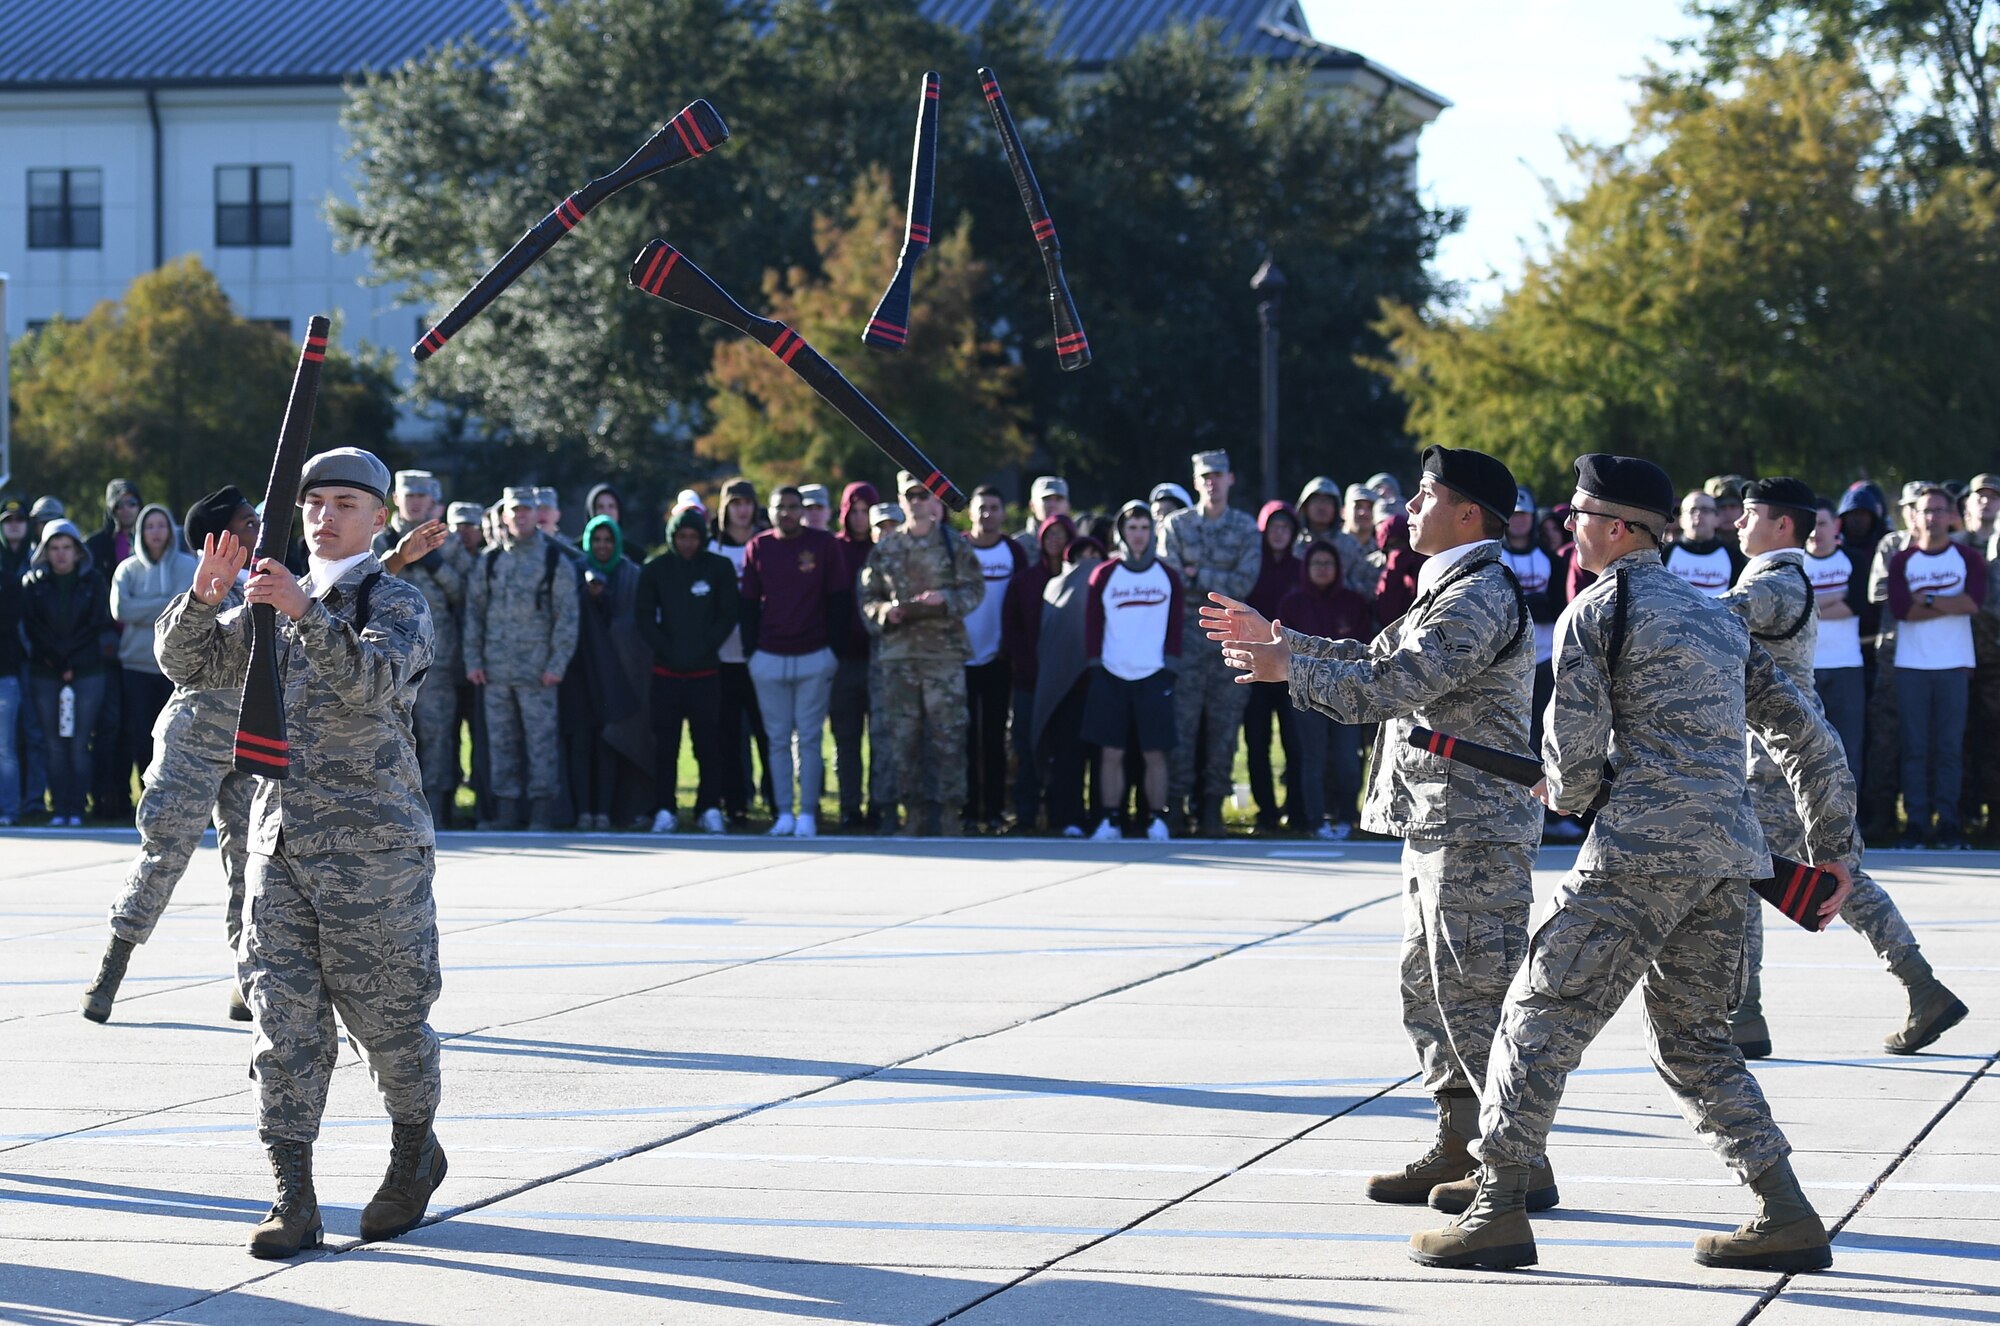 Members of the 335th Training Squadron freestyle drill team perform during the 81st Training Group drill down on the Levitow Training Support Facility drill pad at Keesler Air Force Base, Mississippi, Nov. 1, 2019. Airmen from the 81st TRG competed in a quarterly open ranks inspection, regulation drill routine and freestyle drill routine. Keesler trains more than 30,000 students each year. While in training, Airmen are given the opportunity to volunteer to learn and execute drill down routines. (U.S. Air Force photo by Kemberly Groue)